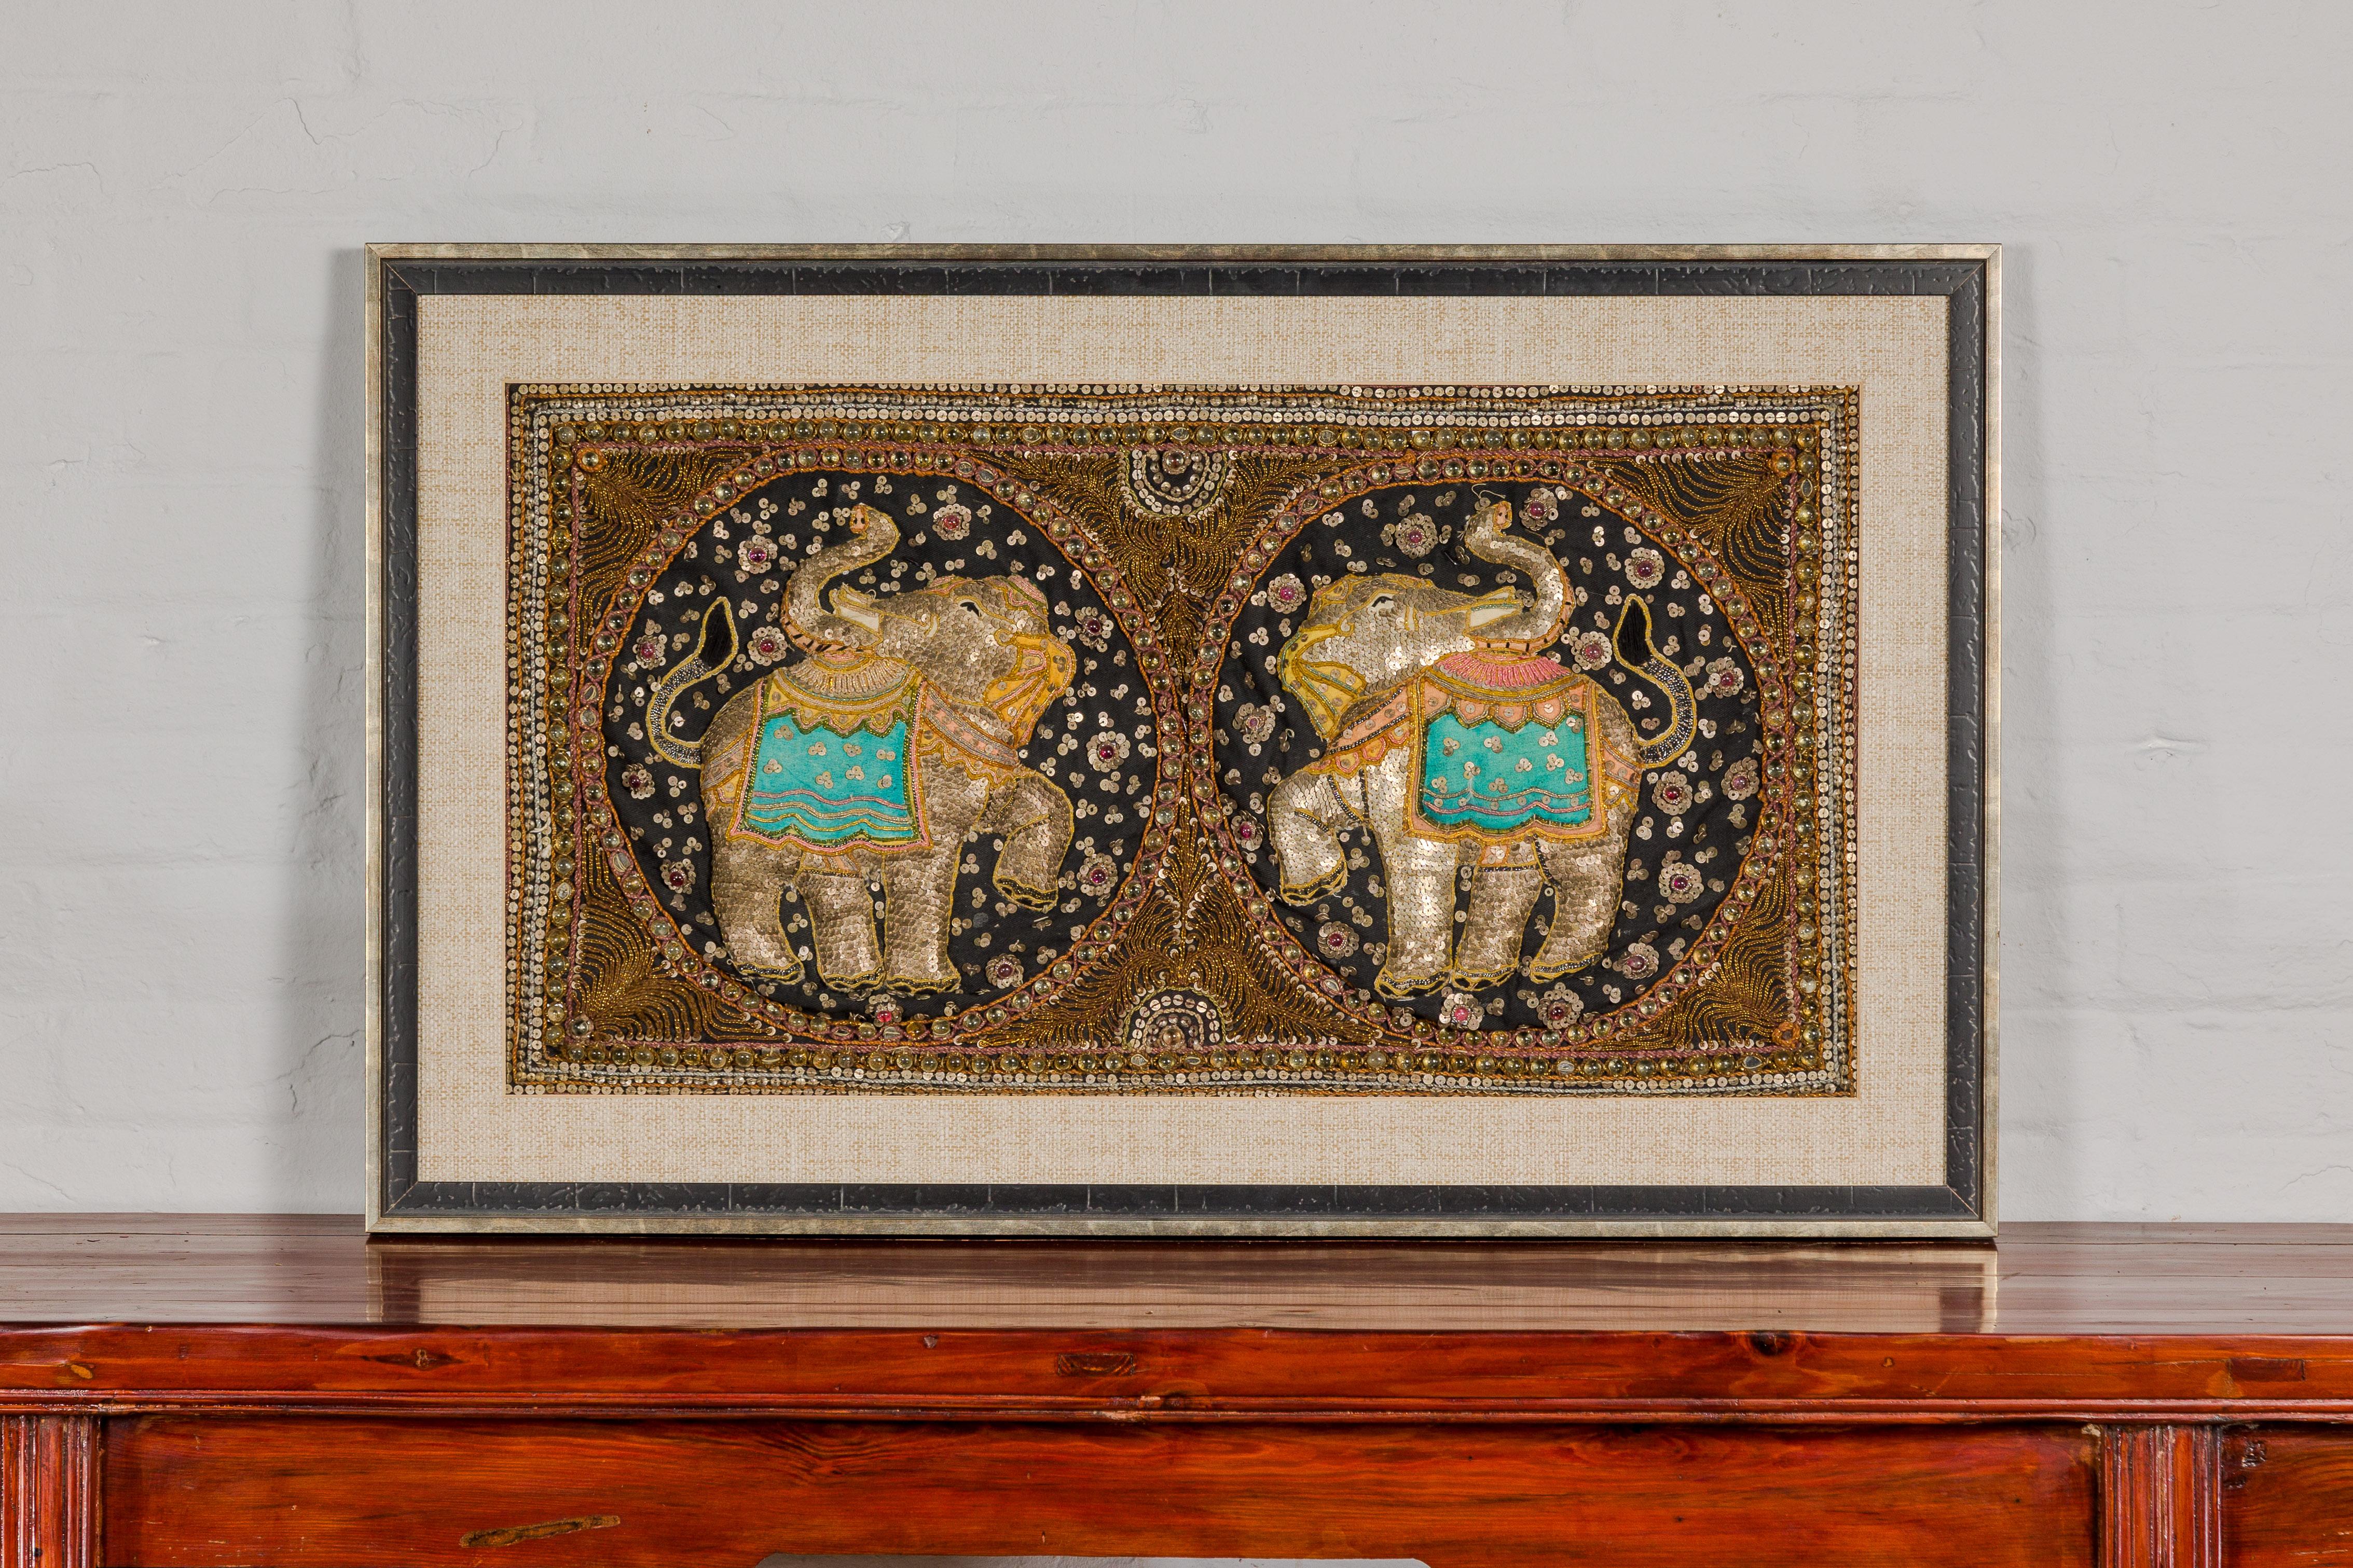 A 19th century Burmese double elephant Kalaga tapestry with sequins, metallic threads and glass beads, in custom frame. This 19th-century Burmese double elephant Kalaga tapestry is an exquisite piece of textile art, masterfully framed to preserve